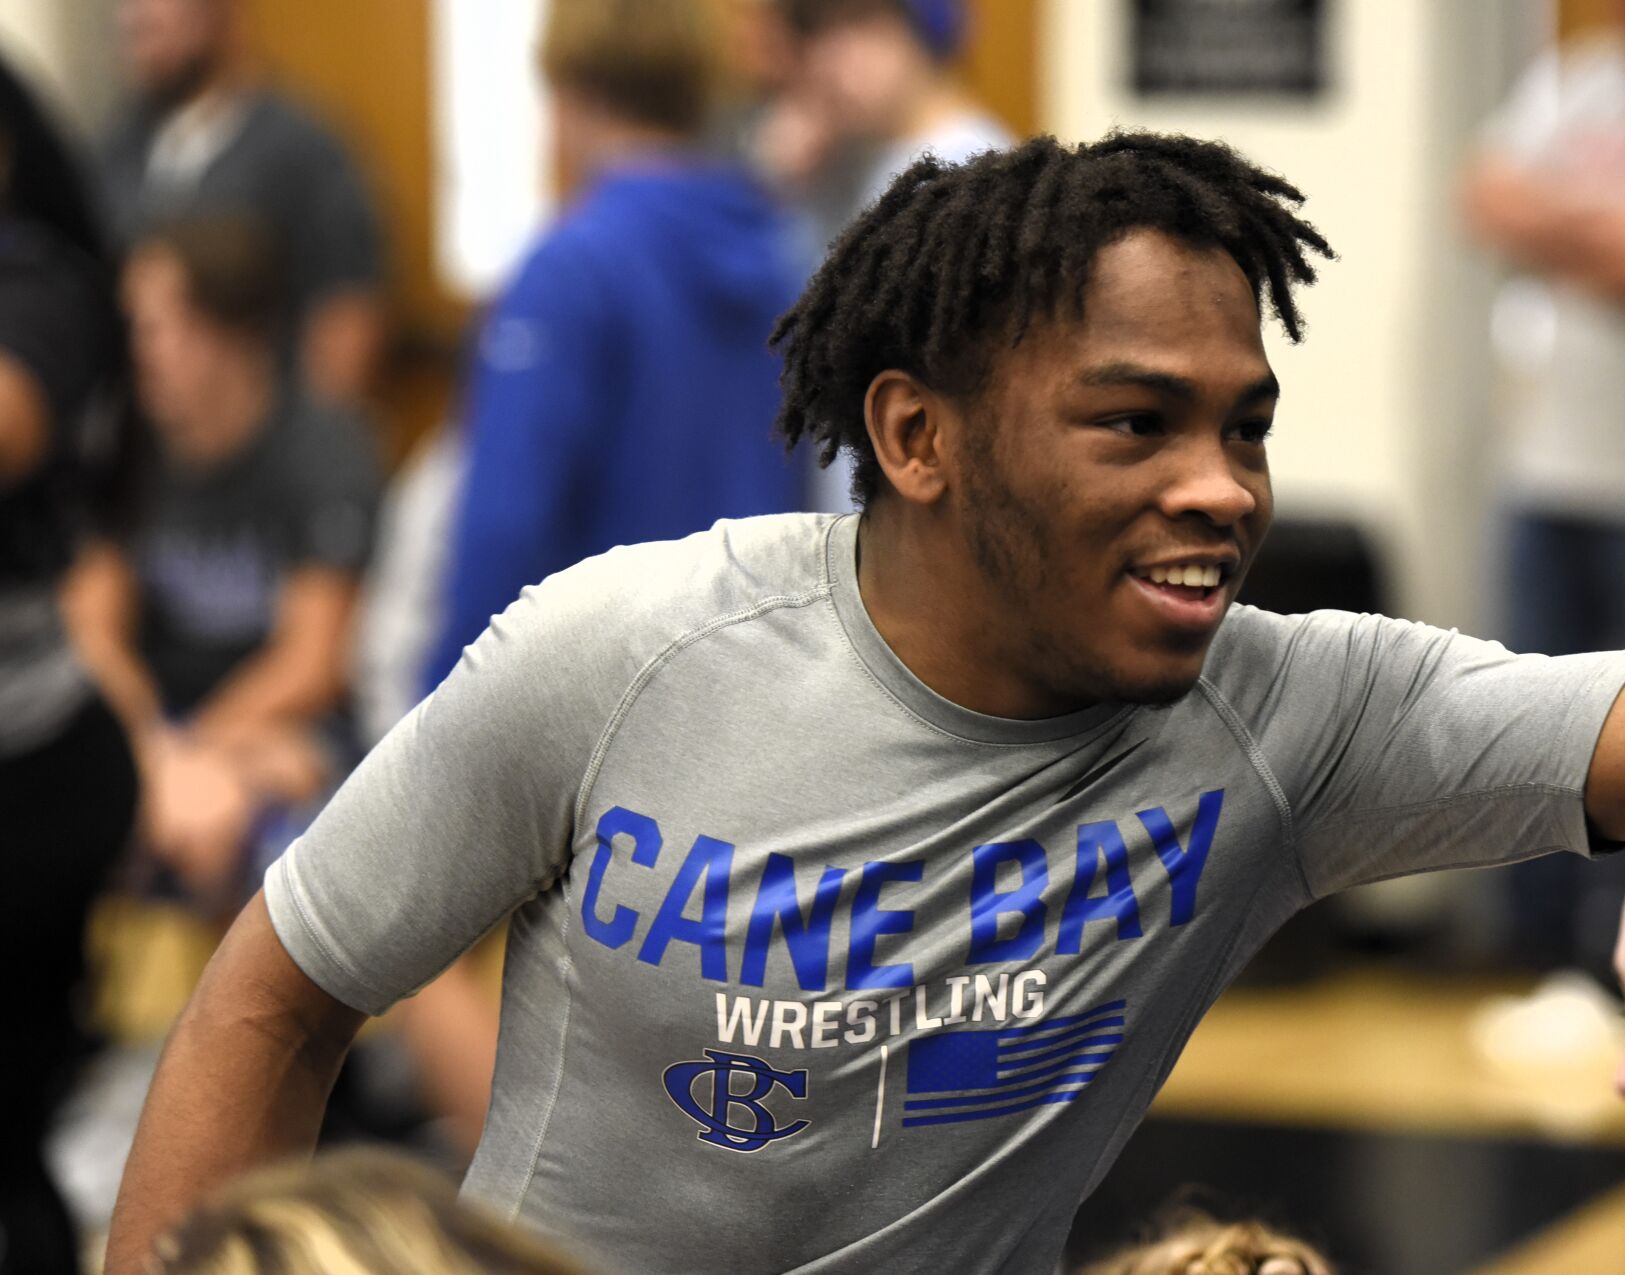 Cane Bay’s Jermaine (JJ) Peace: All-Lowcountry Wrestling Star with 4 State Titles